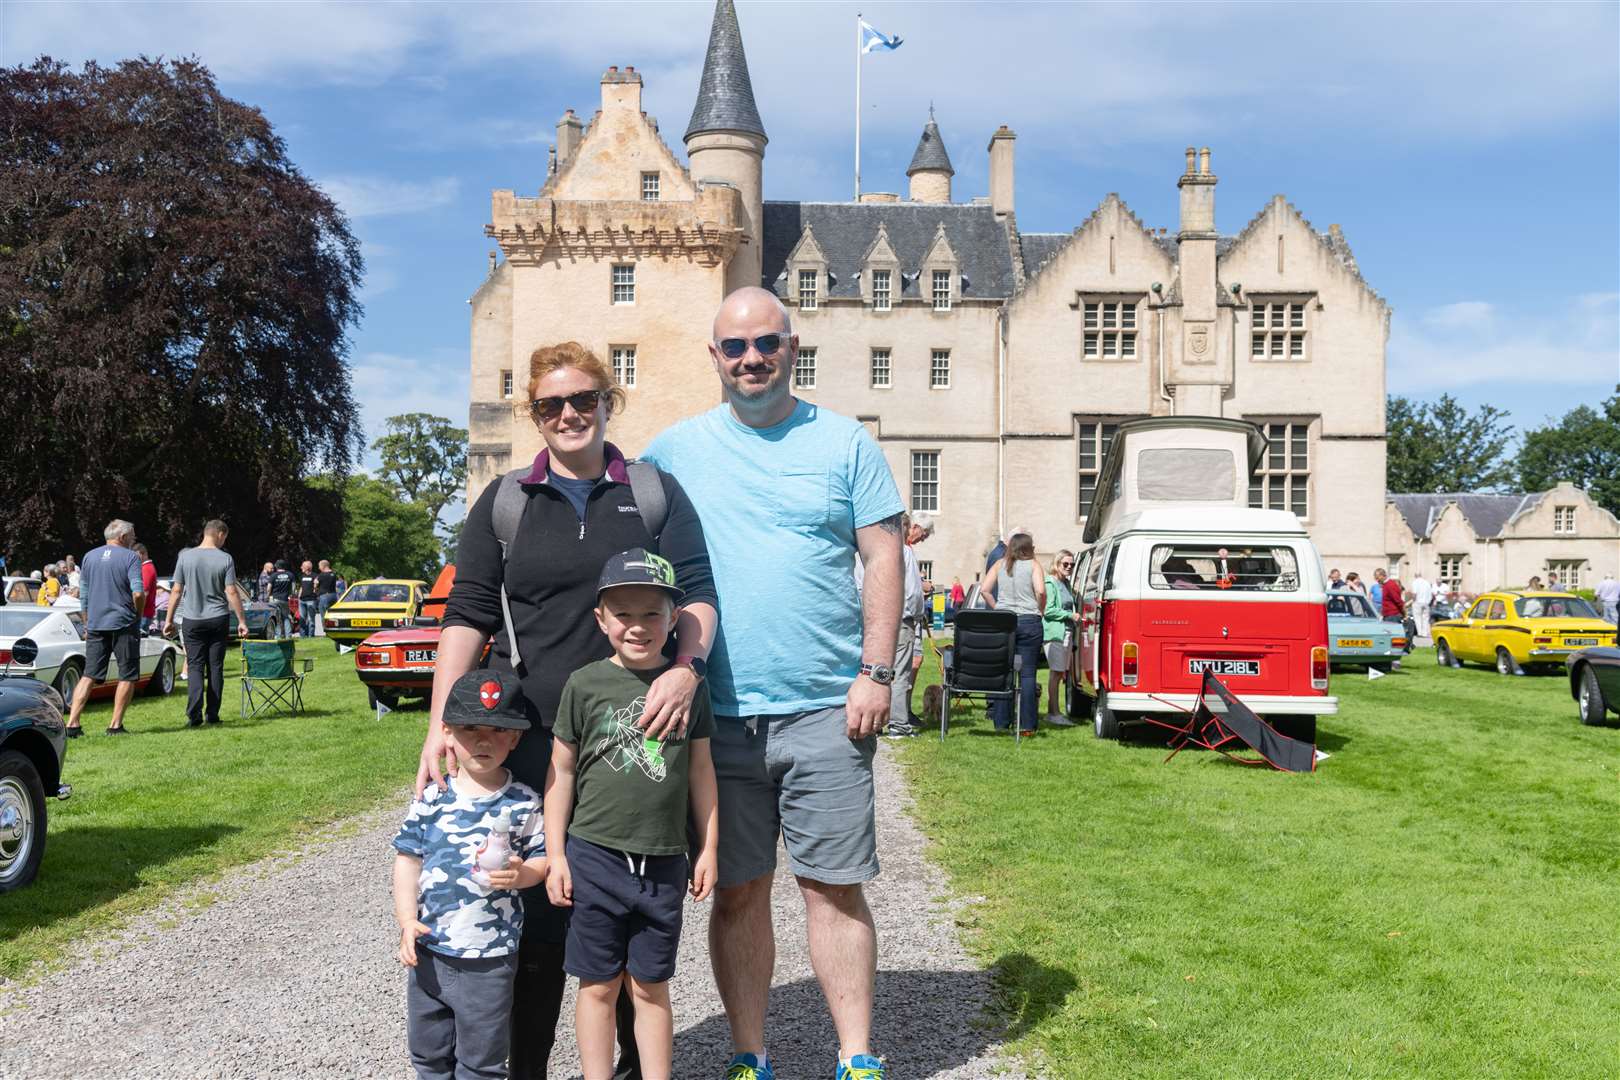 The Platts family enjoying the event at Brodie Castle.